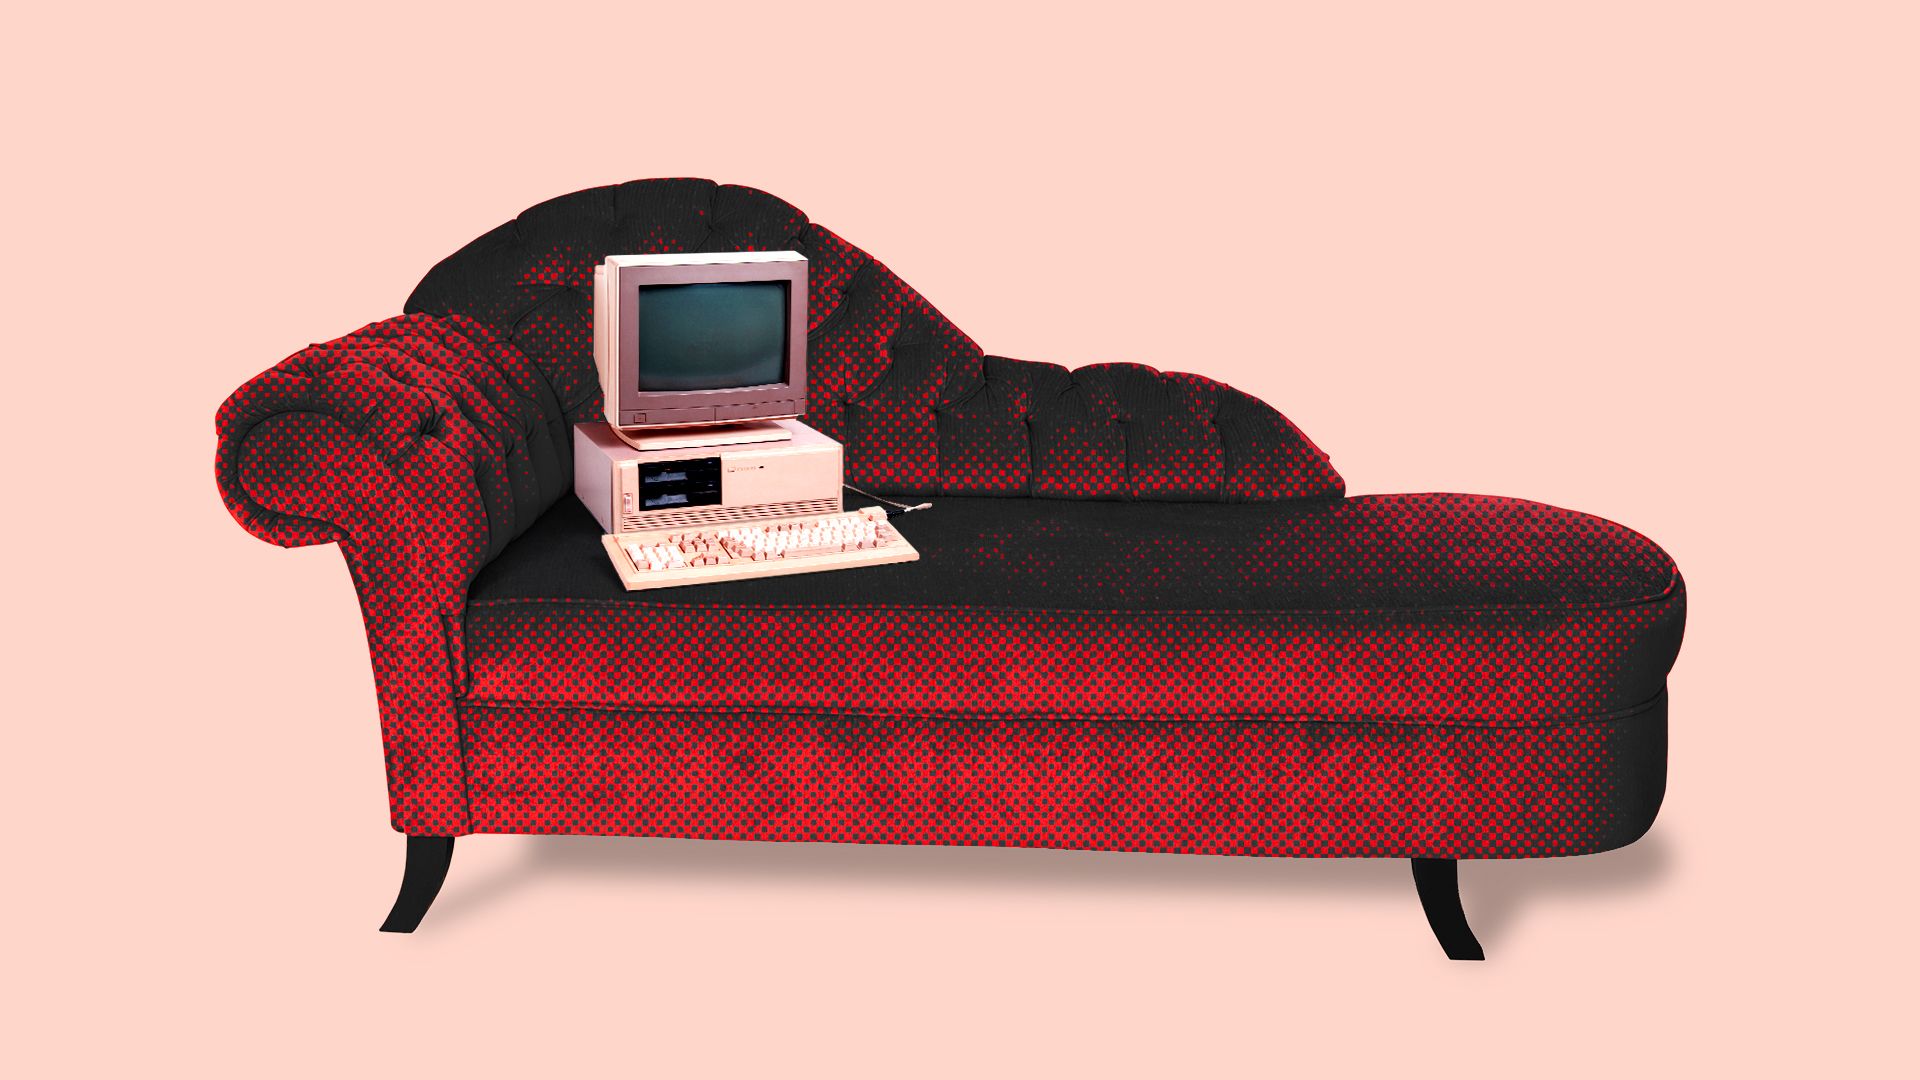 Illustration of a computer on a couch